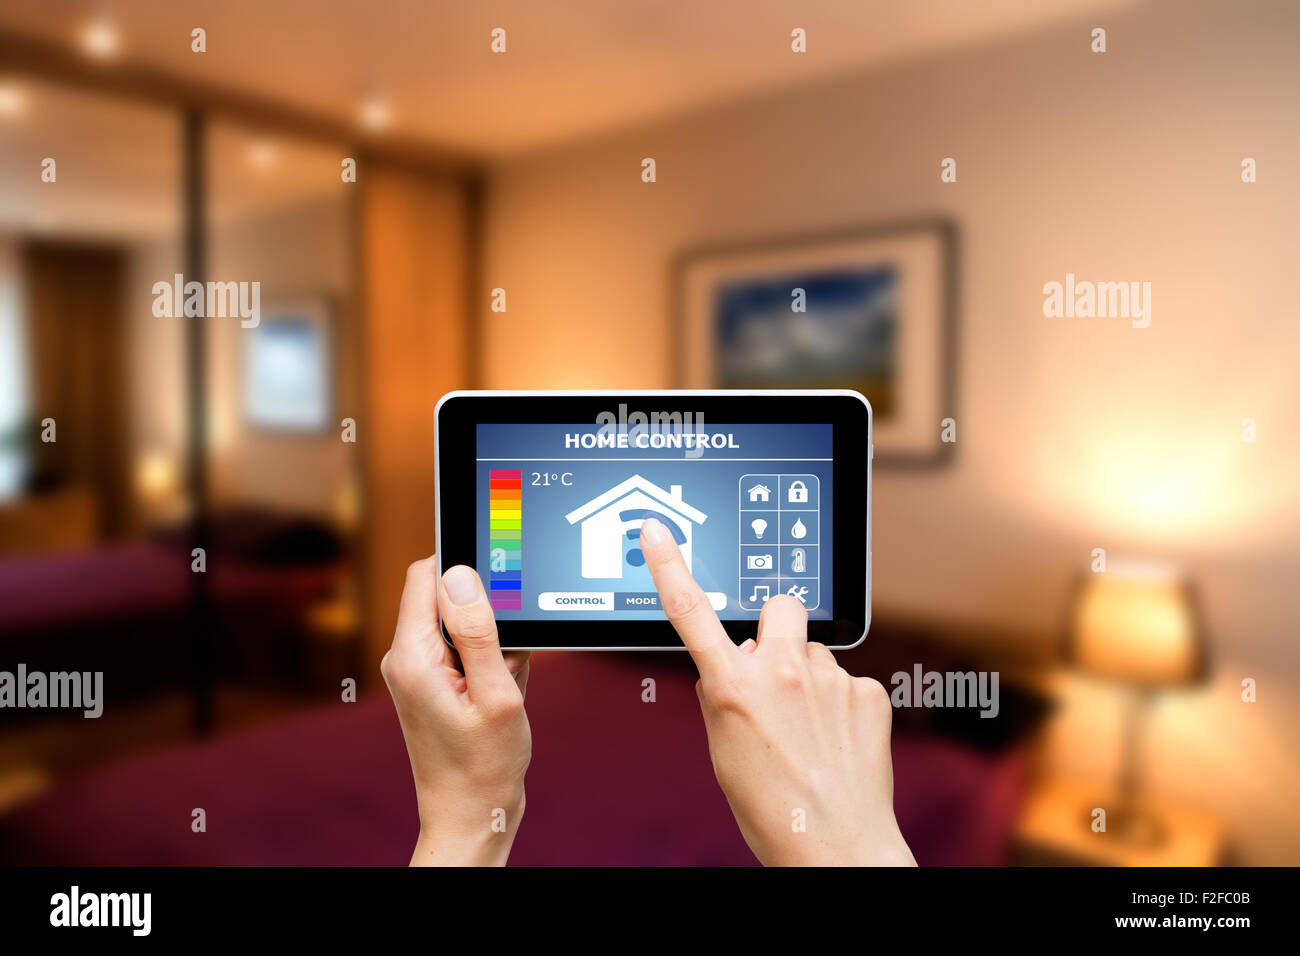 Remote home control system on a digital tablet or phone. Stock Photo